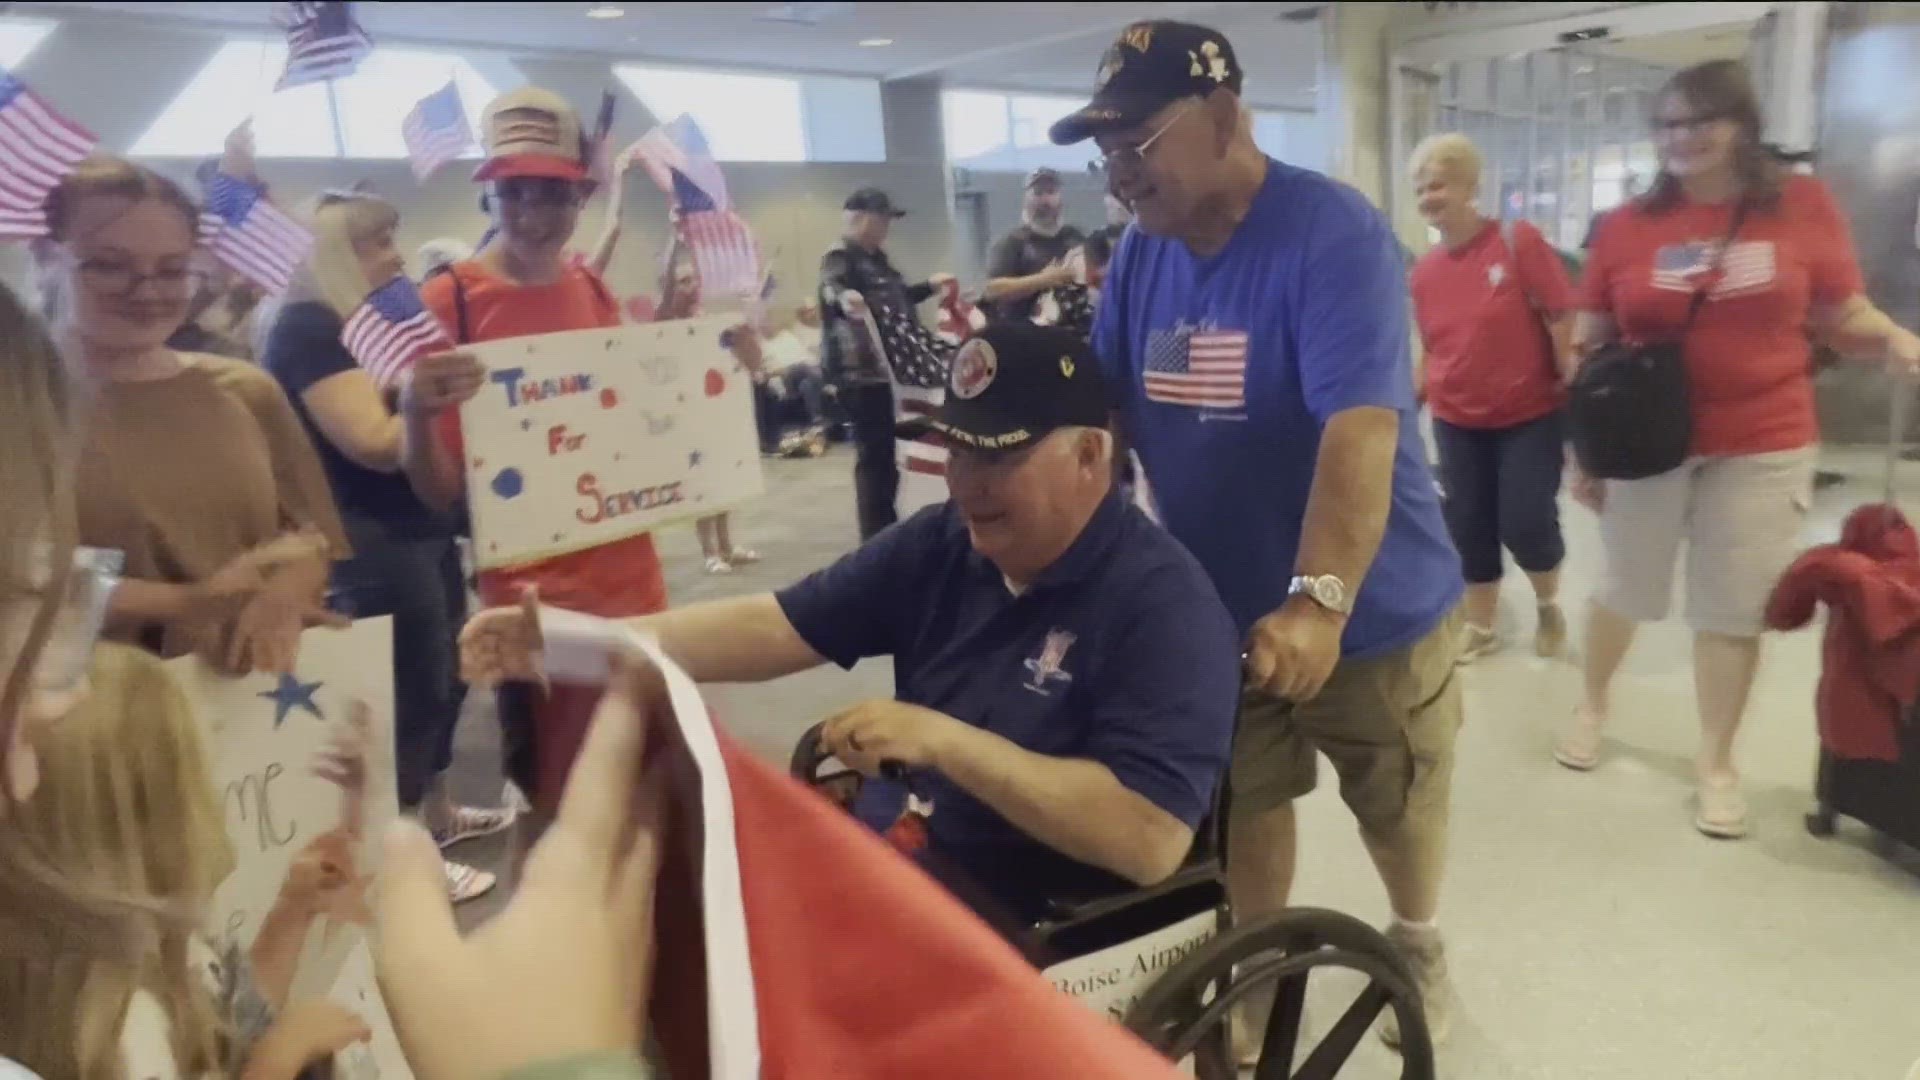 "There's no past Marines, only Marines." Boise's Larry Head served in the Vietnam War as a young marine. Now, decades later, he gets the 'welcome home' he deserves.